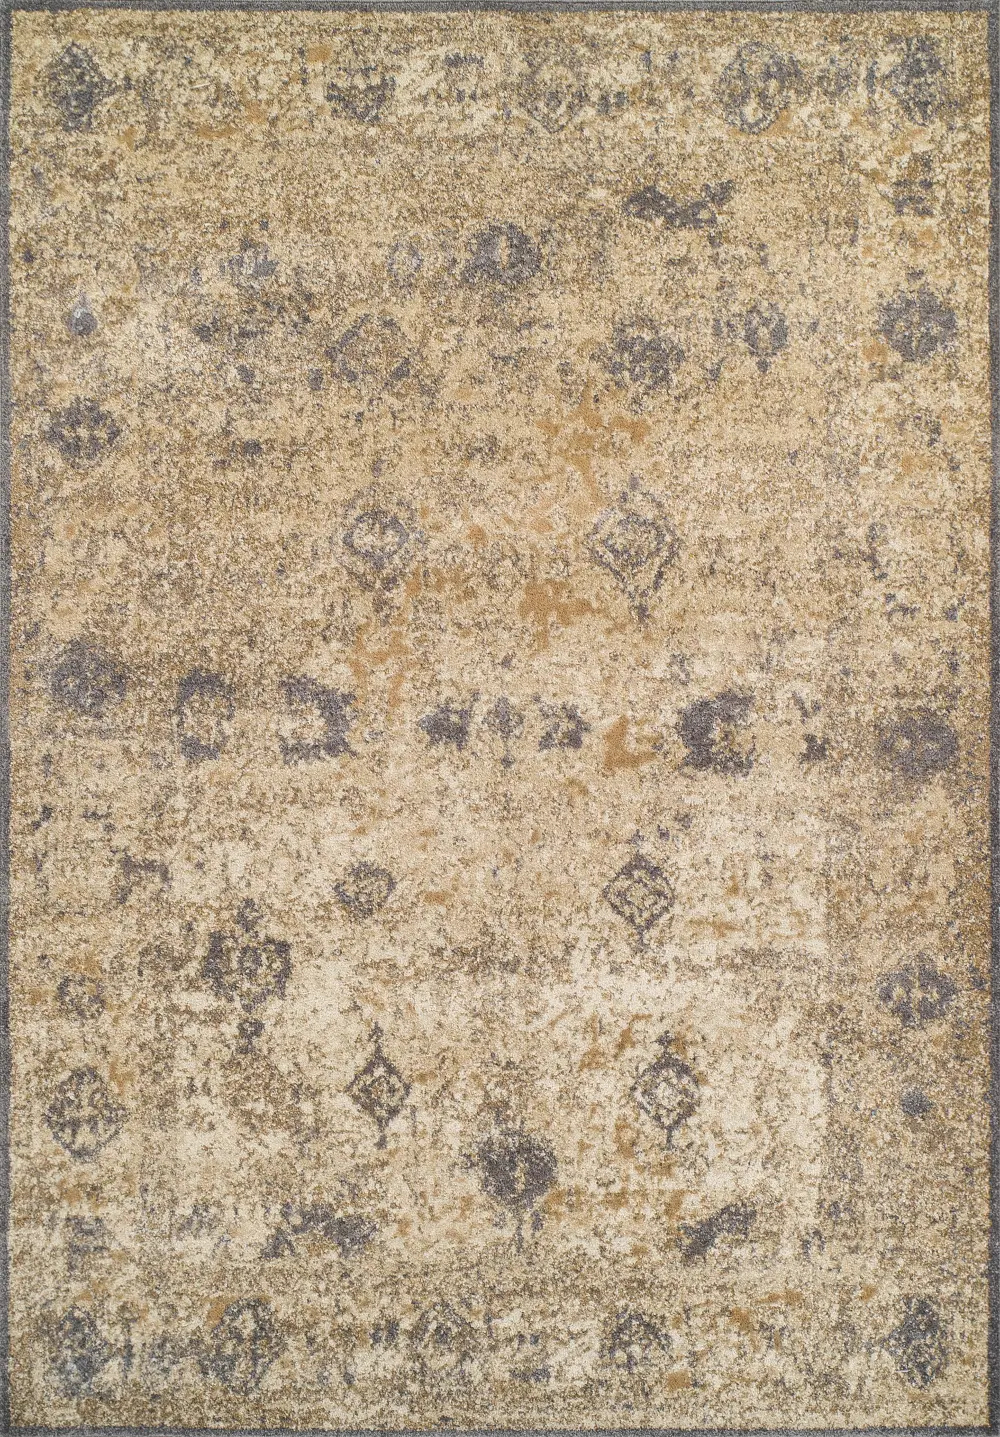 AQ1GR5X8/GREYRUG Antiquity 5 x 8 Ivory and Gray Area Rug-1